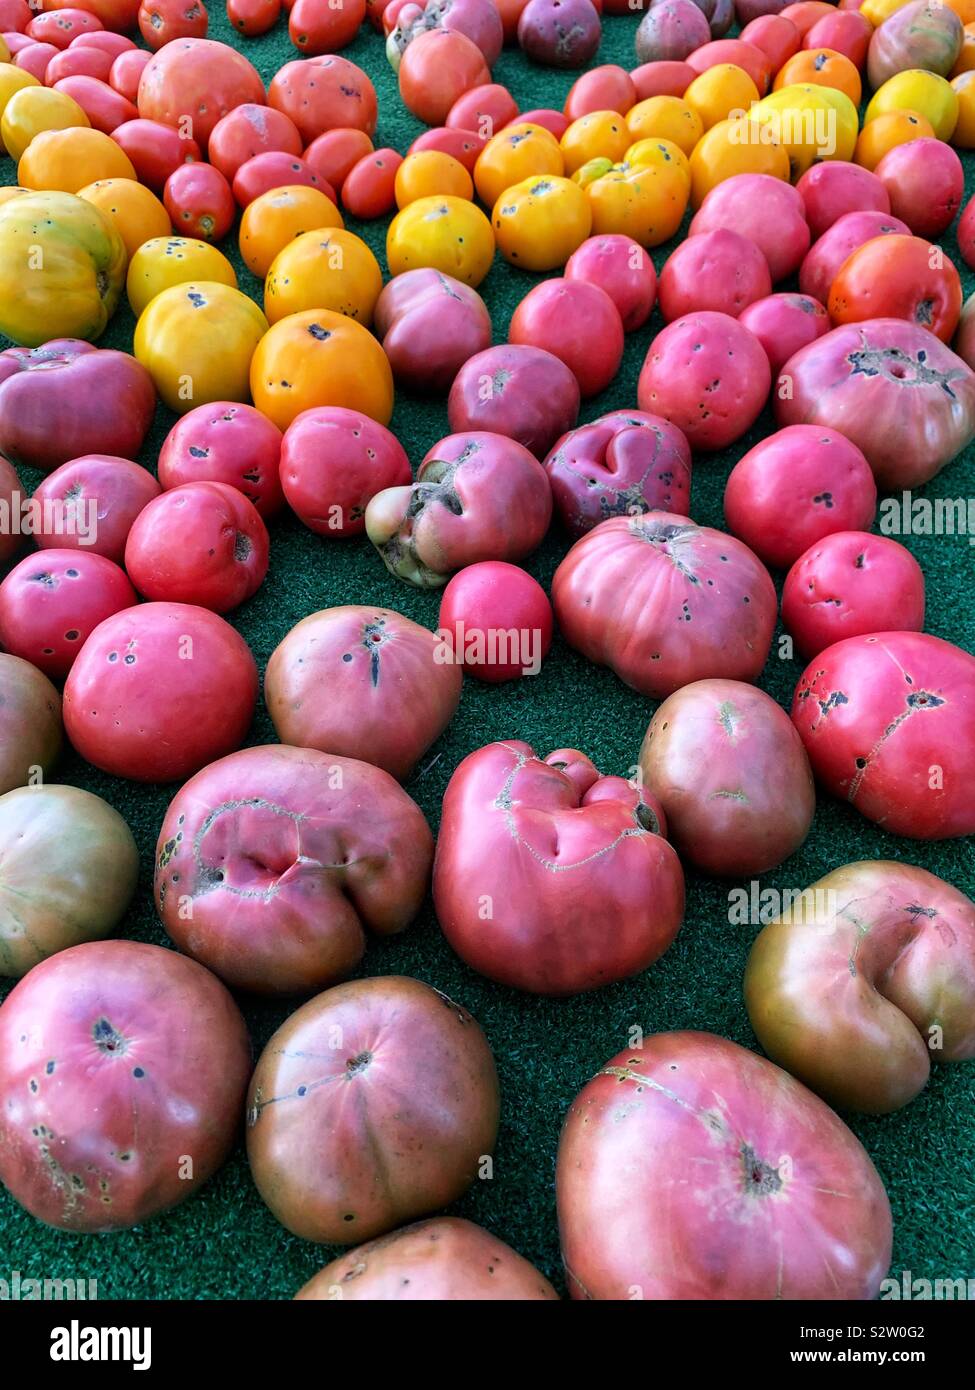 Many delicious varieties of huge farm fresh tomatoes rolling around a table. Stock Photo